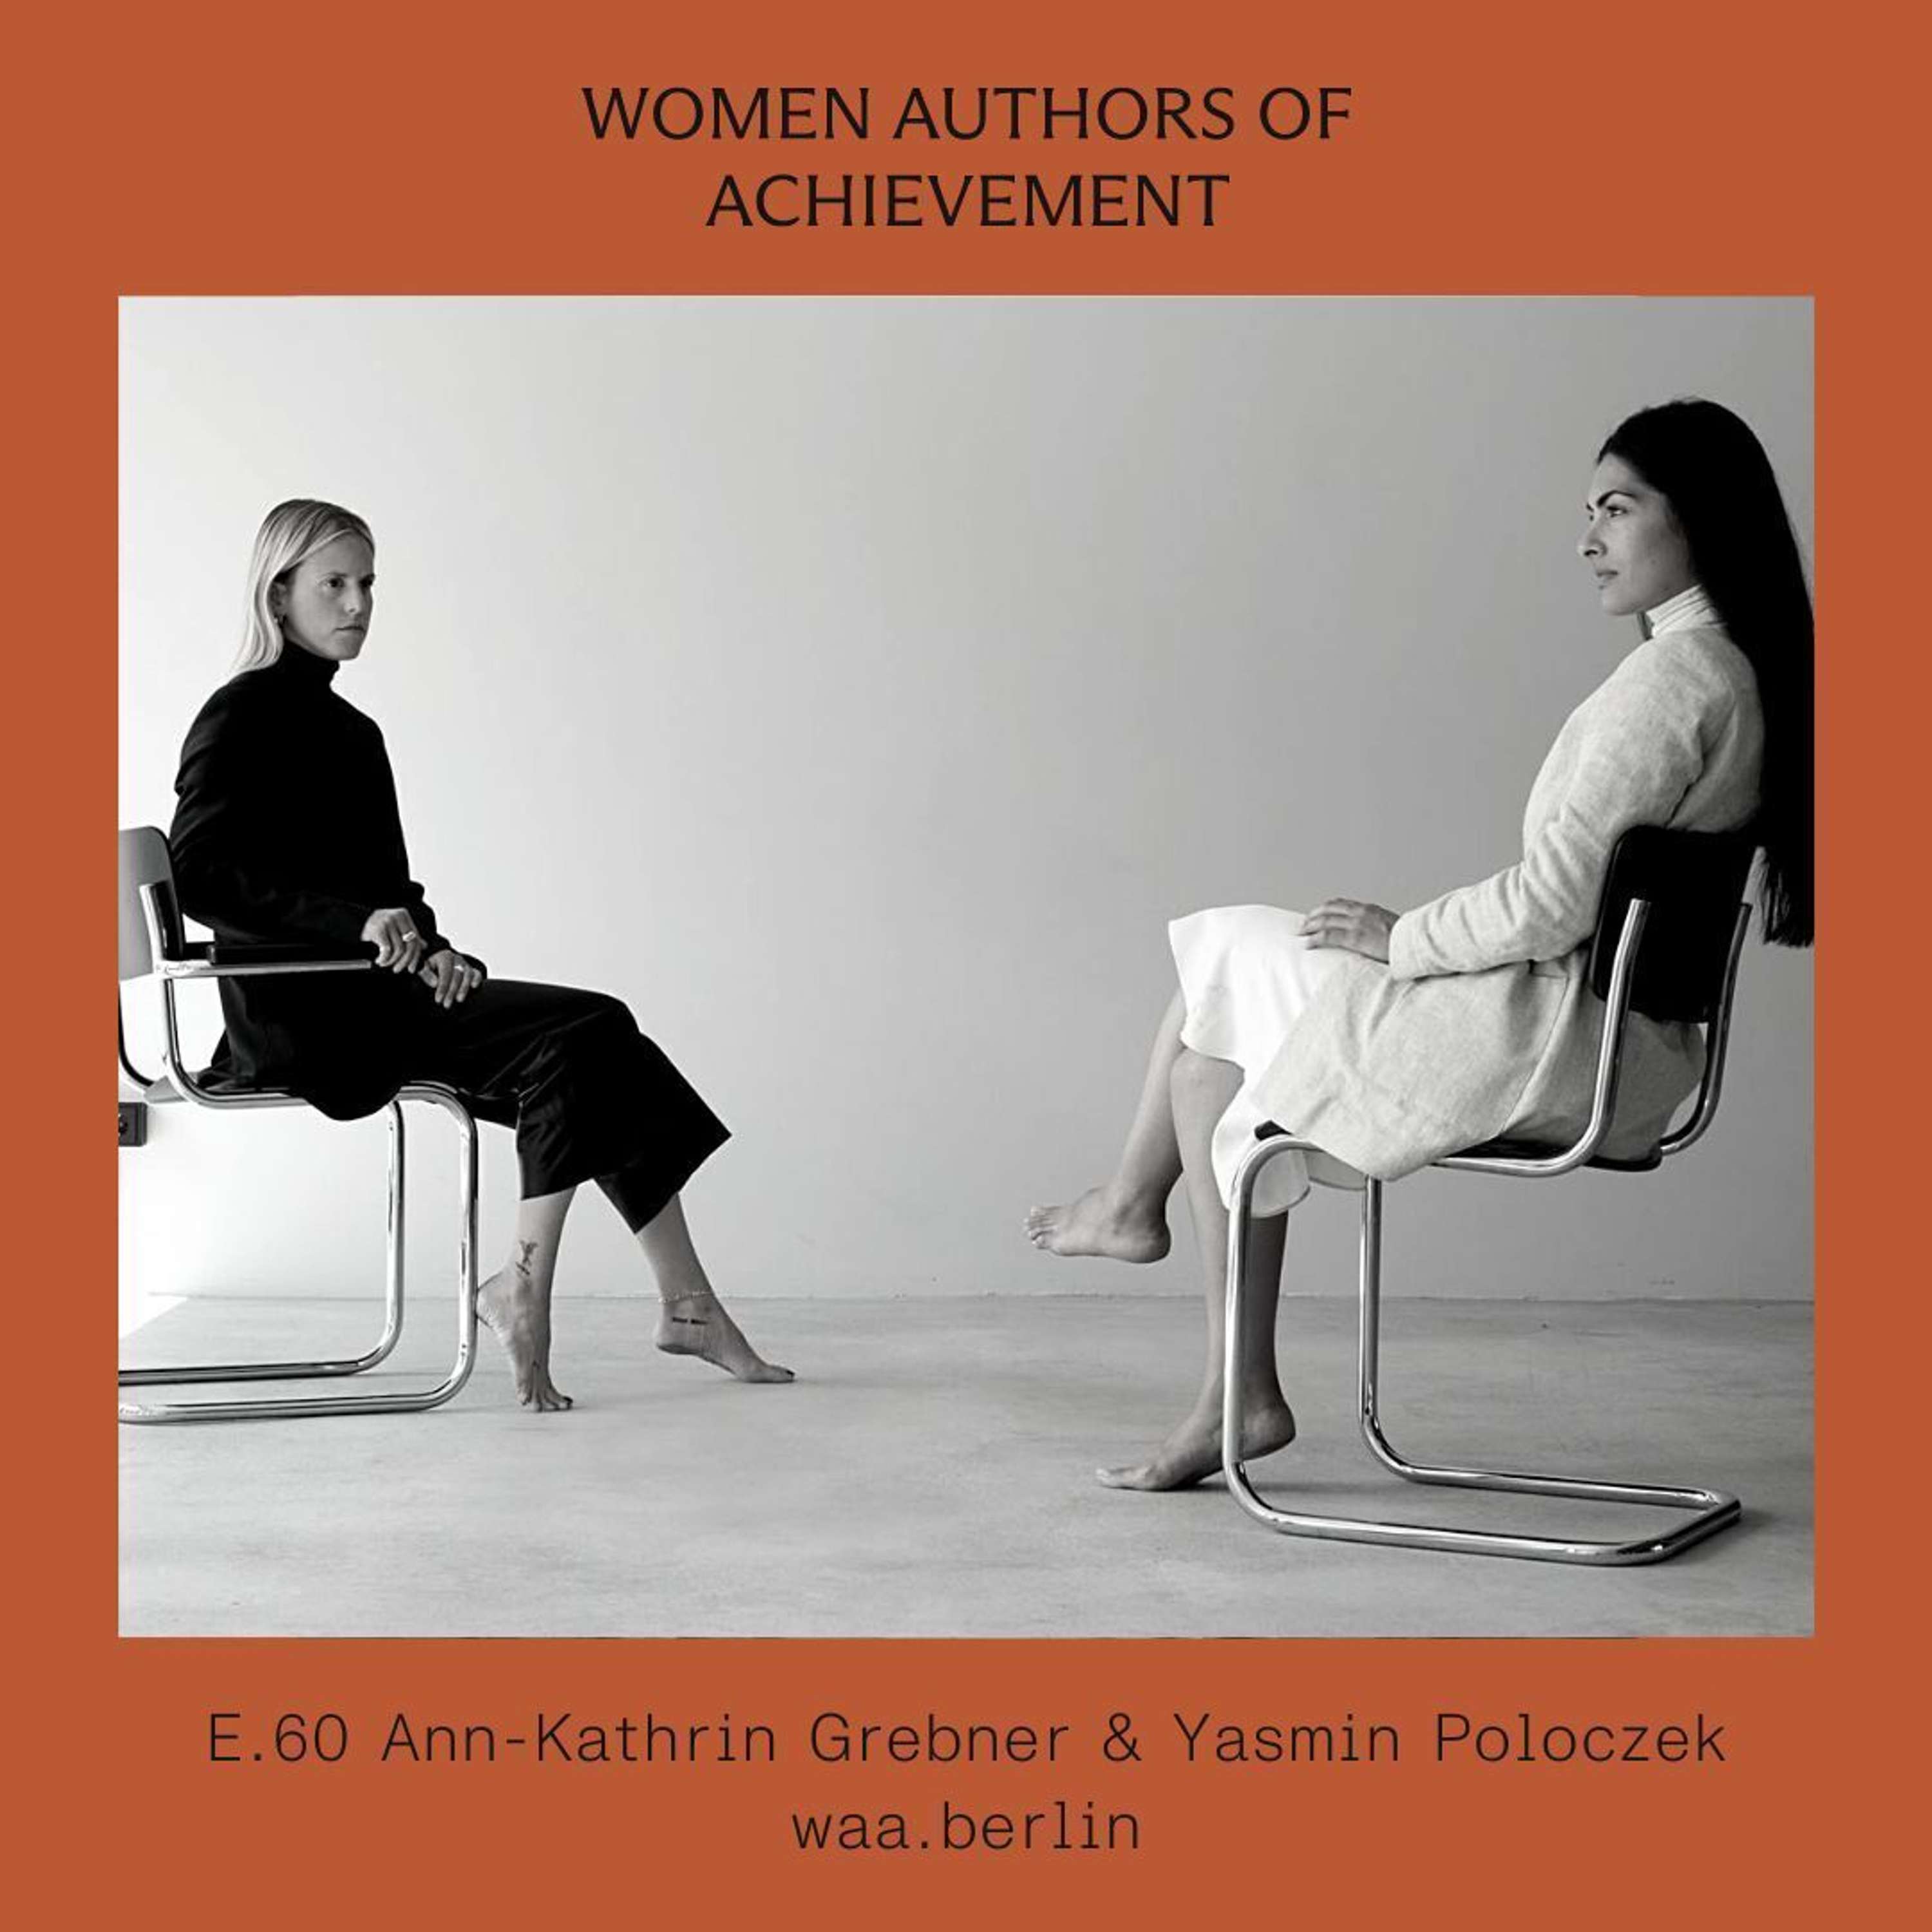 E.60 On traditions, boundaries and mindful health practices with Ann-Kathrin Grebner and Yasmin Poloczek